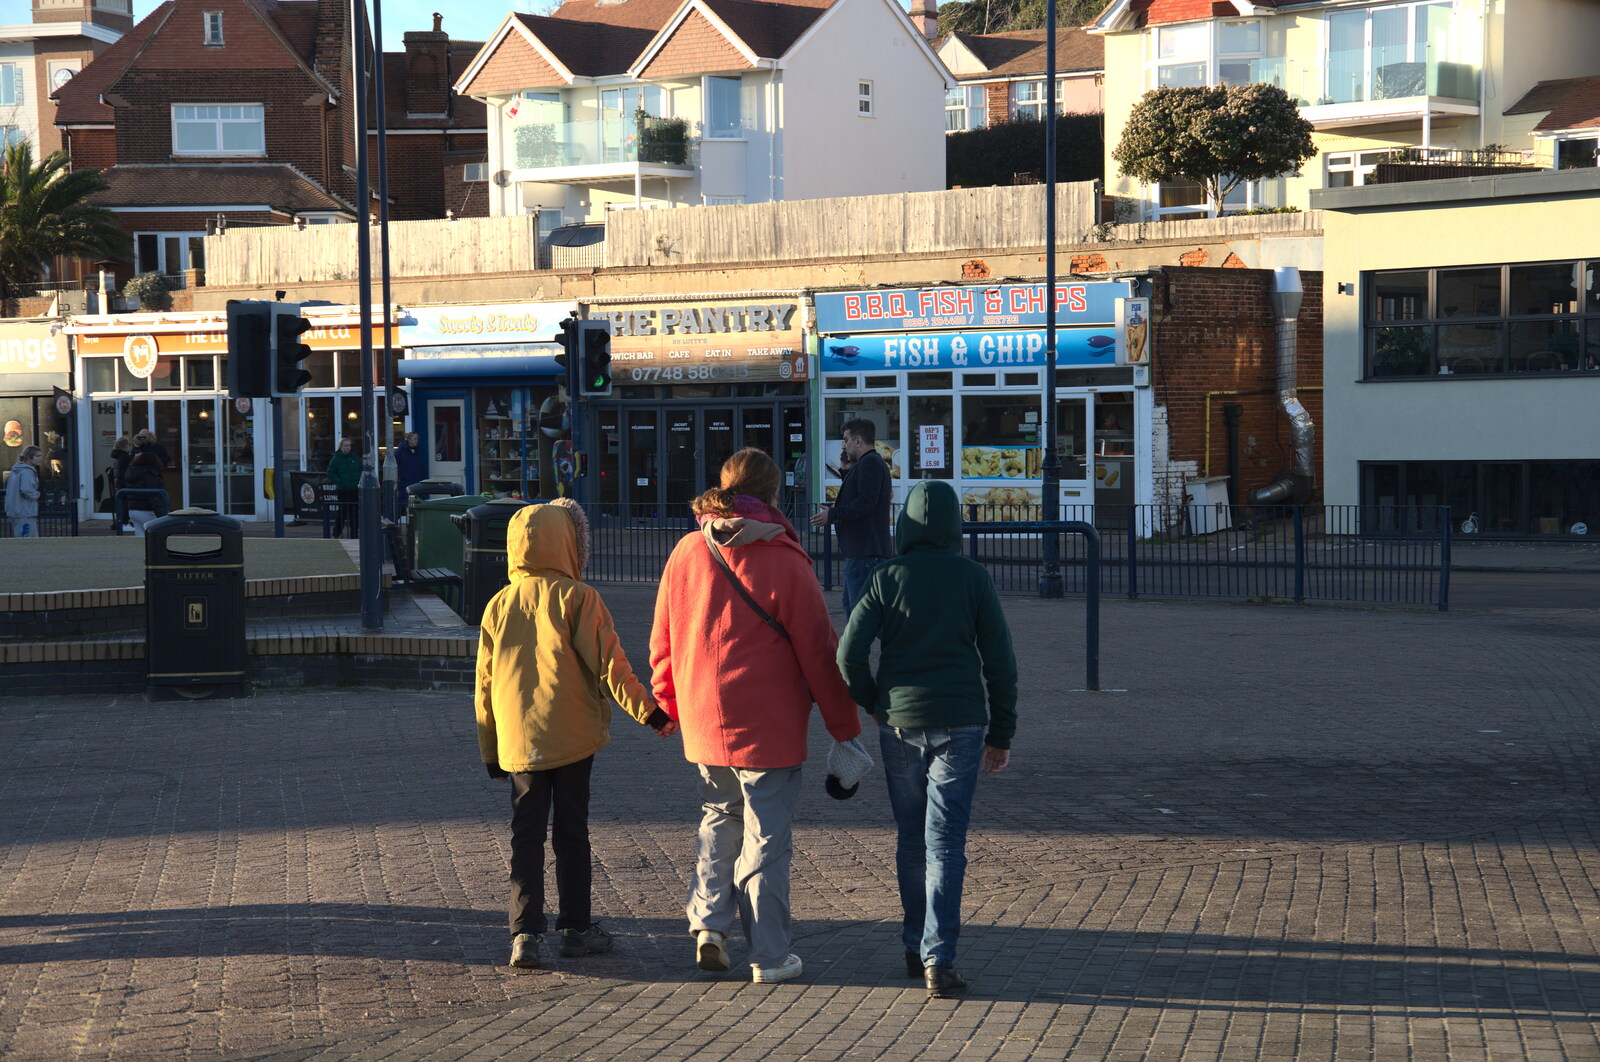 A Short Trip to Felixstowe, Suffolk - 22nd January 2023: We head off to the chipper to feed Fred